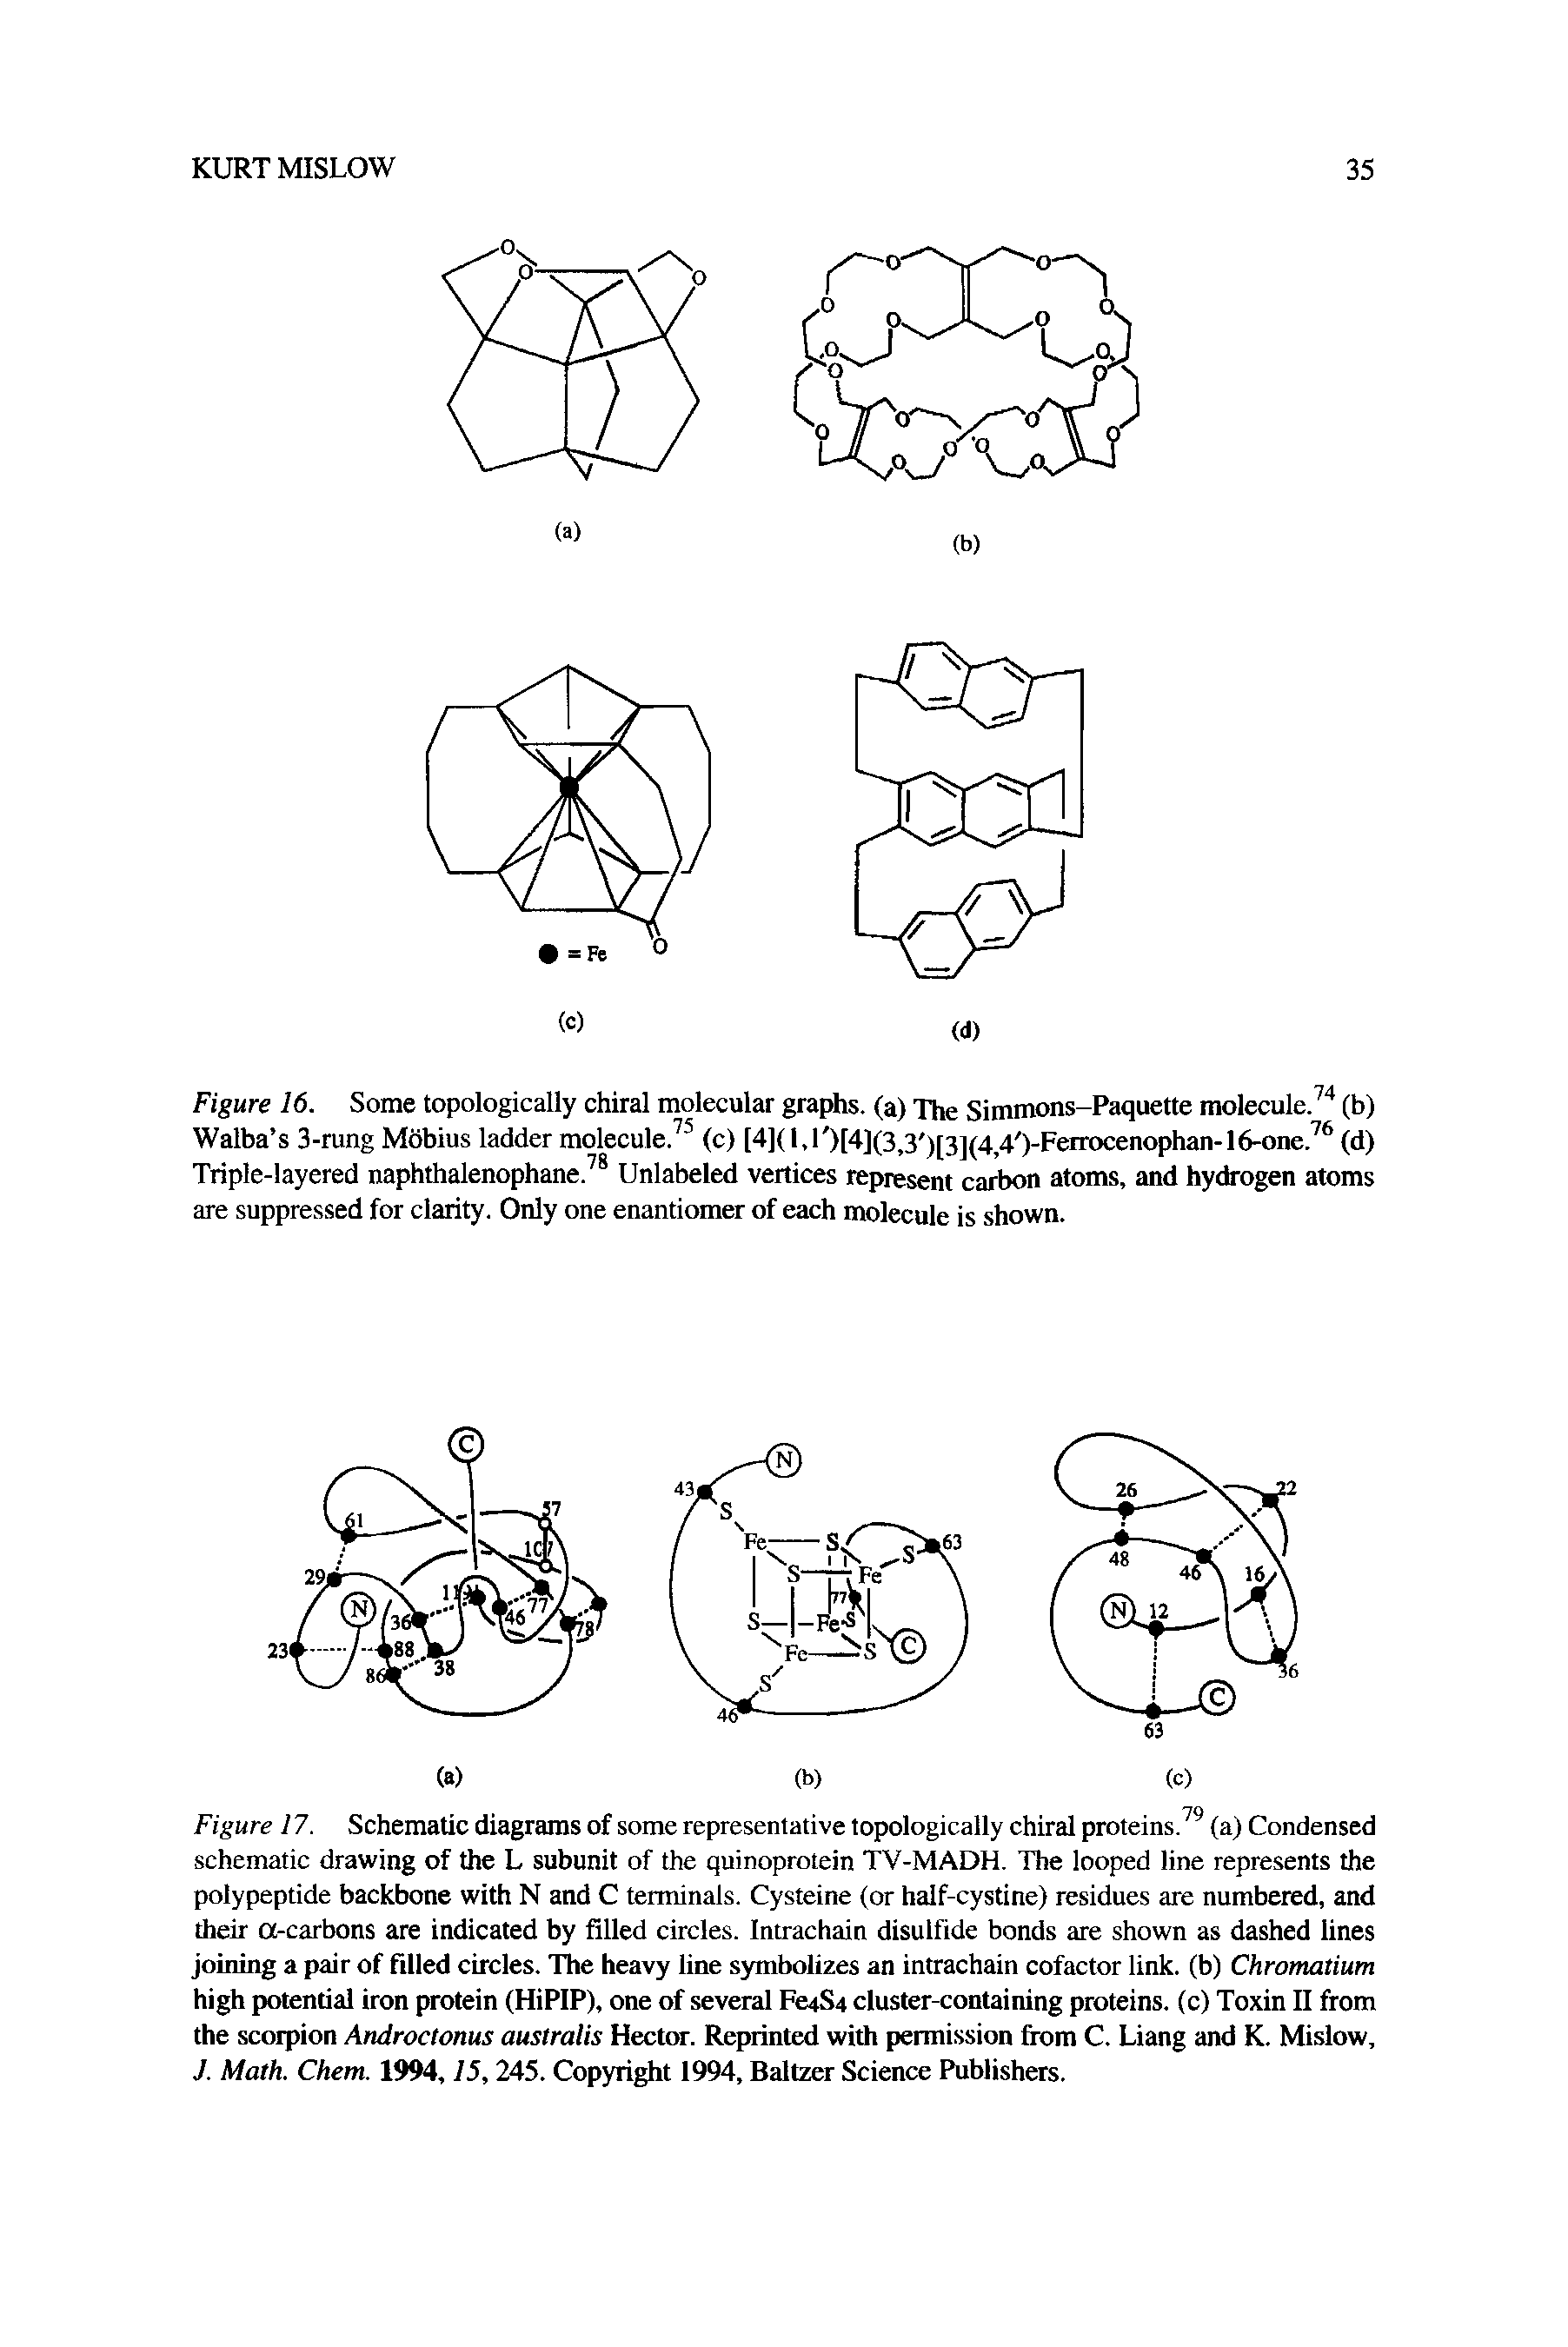 Figure 16. Some topologically chiral molecular graphs, (a) The Simmons-Paquette molecule.74 (b) Walba s 3-rung Mobius ladder molecule.75 (c) [4](l,l )[4](3,3 )[3](4 4 )-Ferrocenophan-16-one.76 (d) Triple-layered naphthalenophane.78 Unlabeled vertices represent carbon atoms, and hydrogen atoms are suppressed for clarity. Only one enantiomer of each molecule is shown.